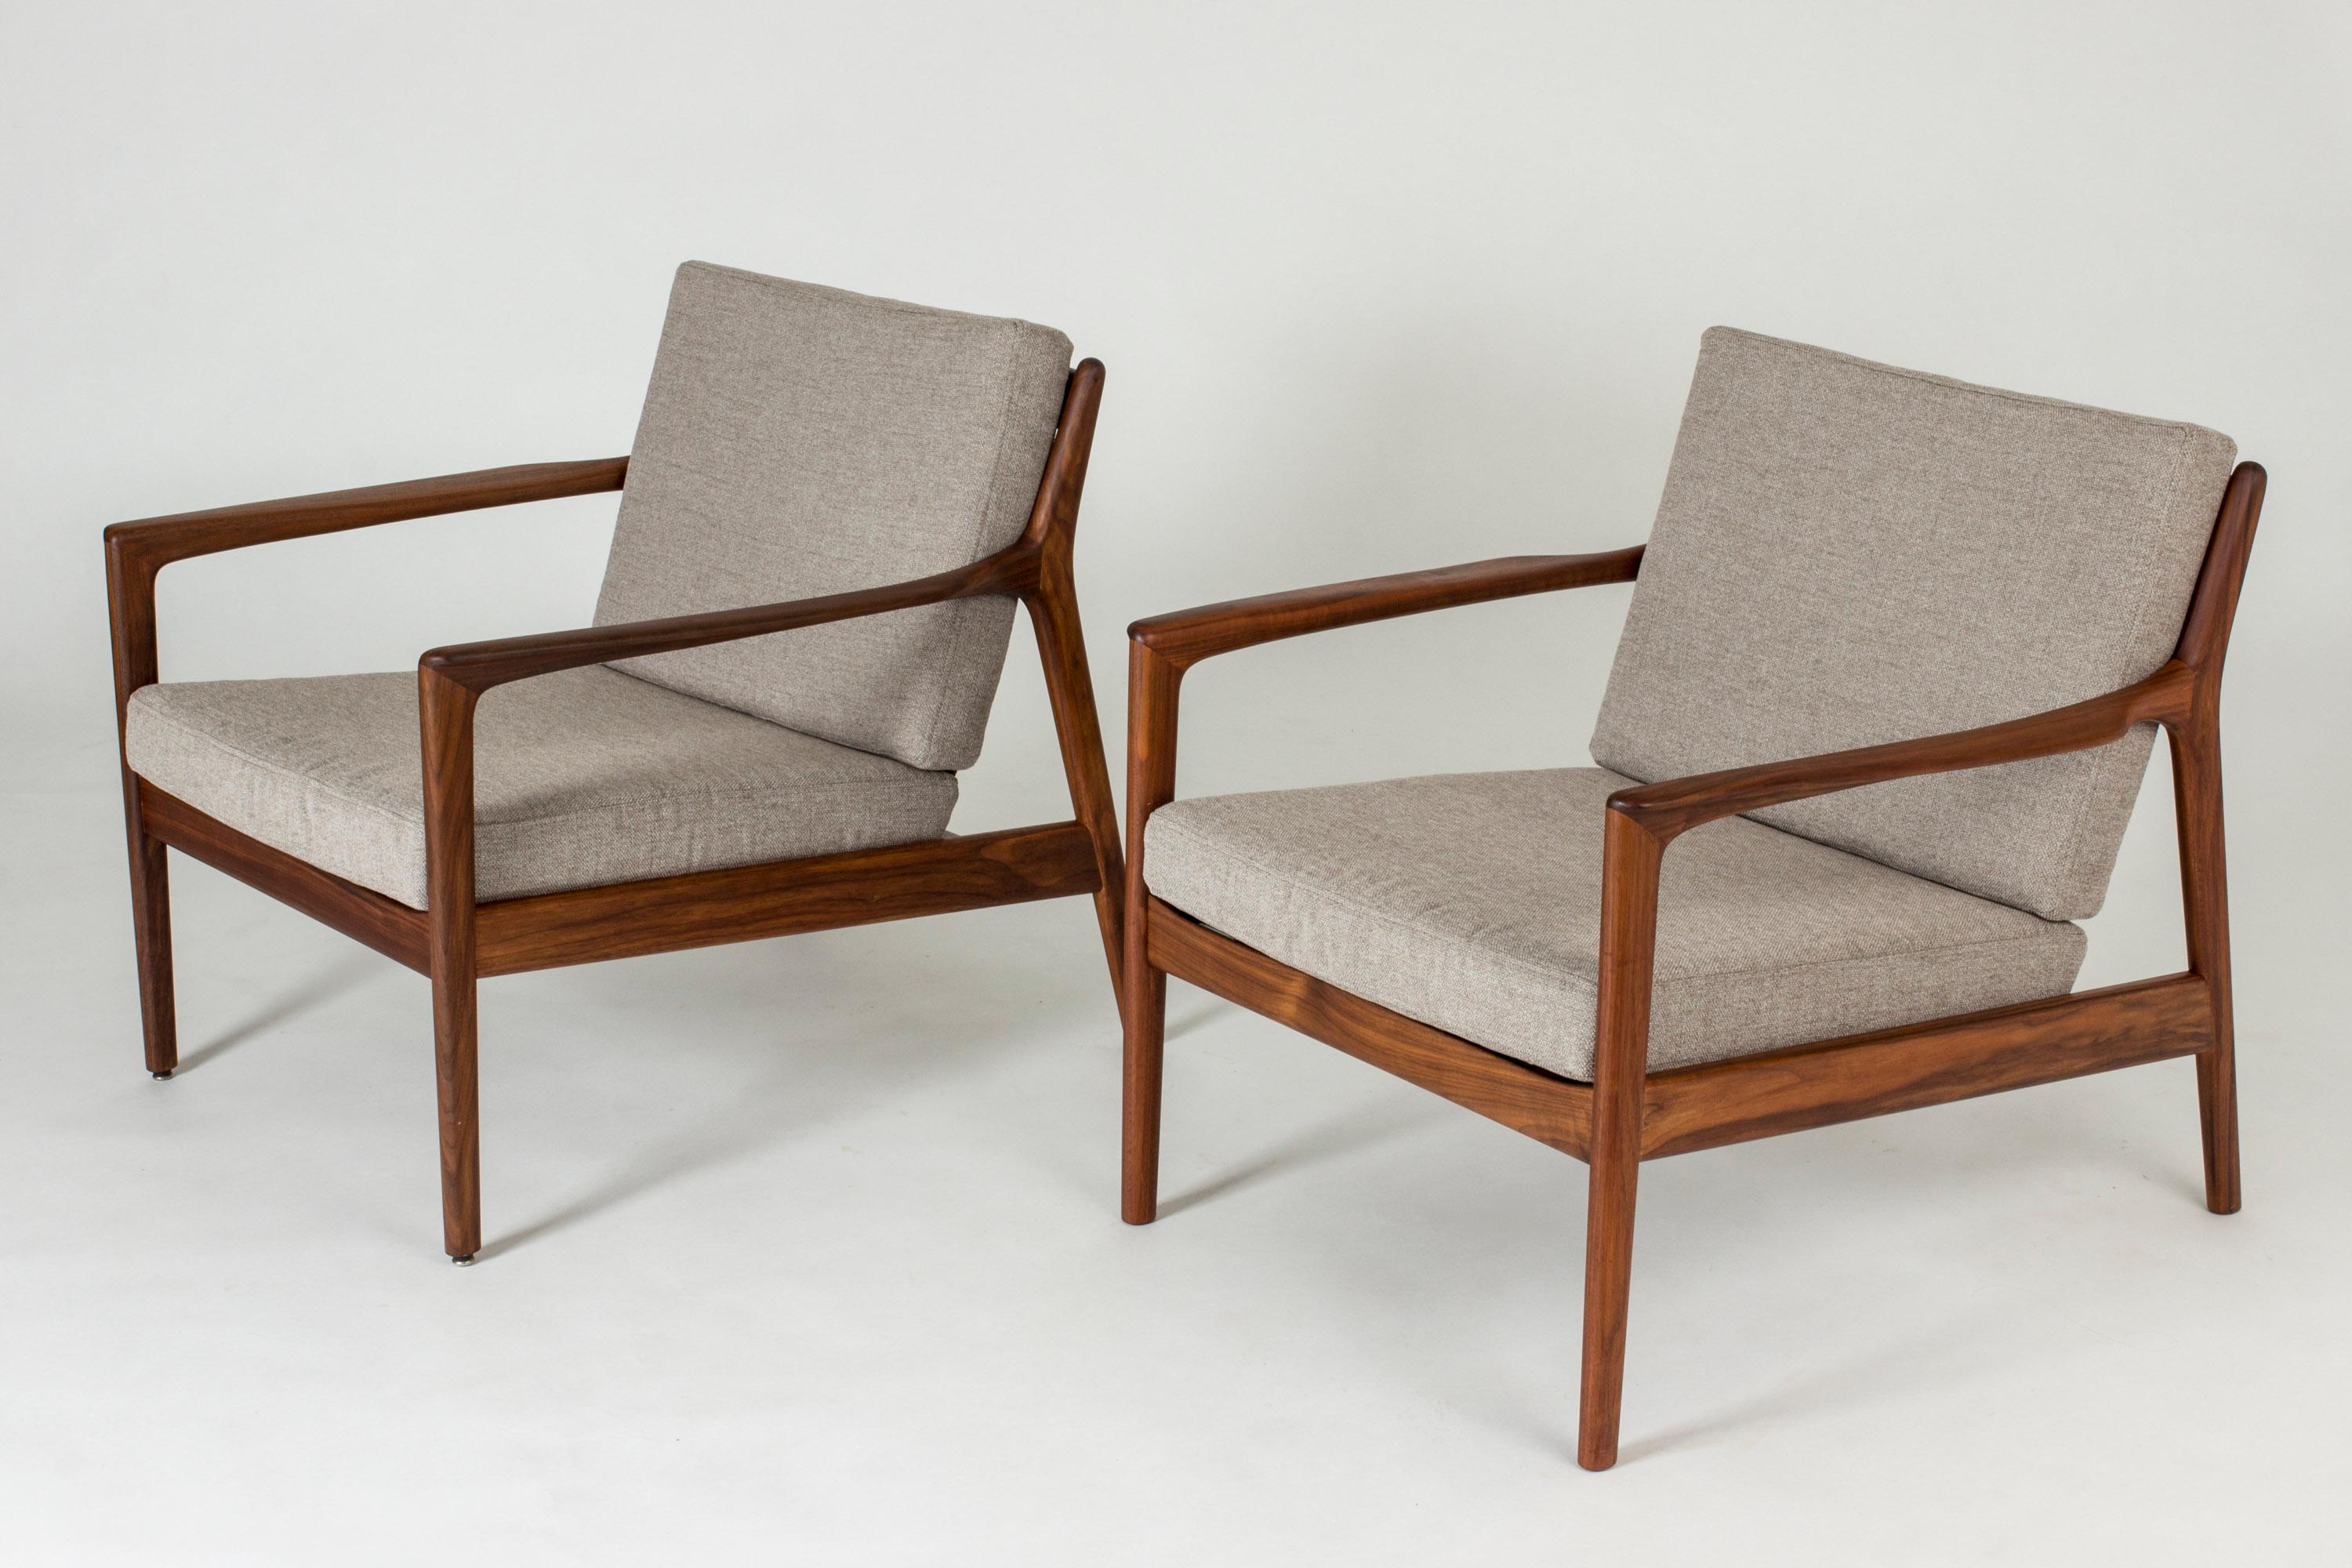 Swedish Pair of “USA 75” Teak Lounge Chairs by Folke Ohlsson for DUX, Sweden, 1960s